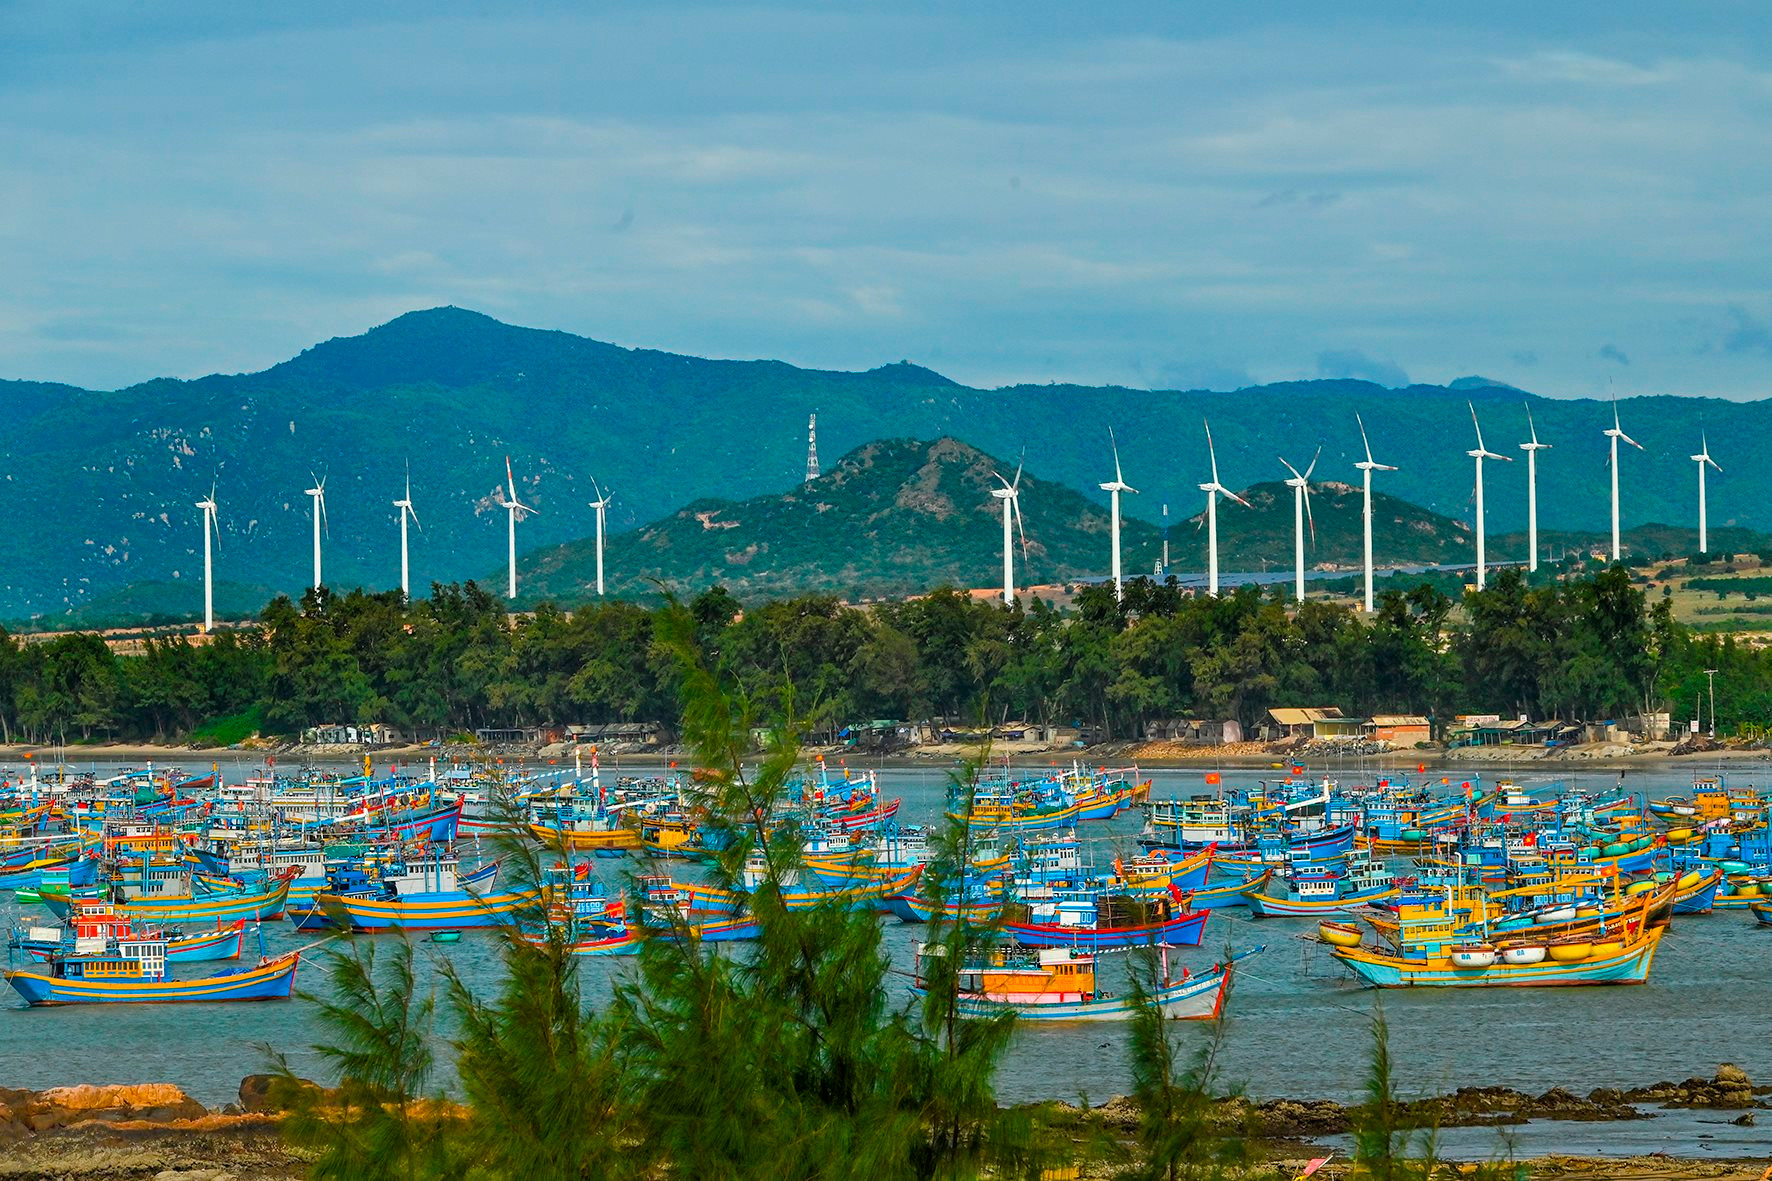 Binh Thuan wind power "forest" lures great number of tourists